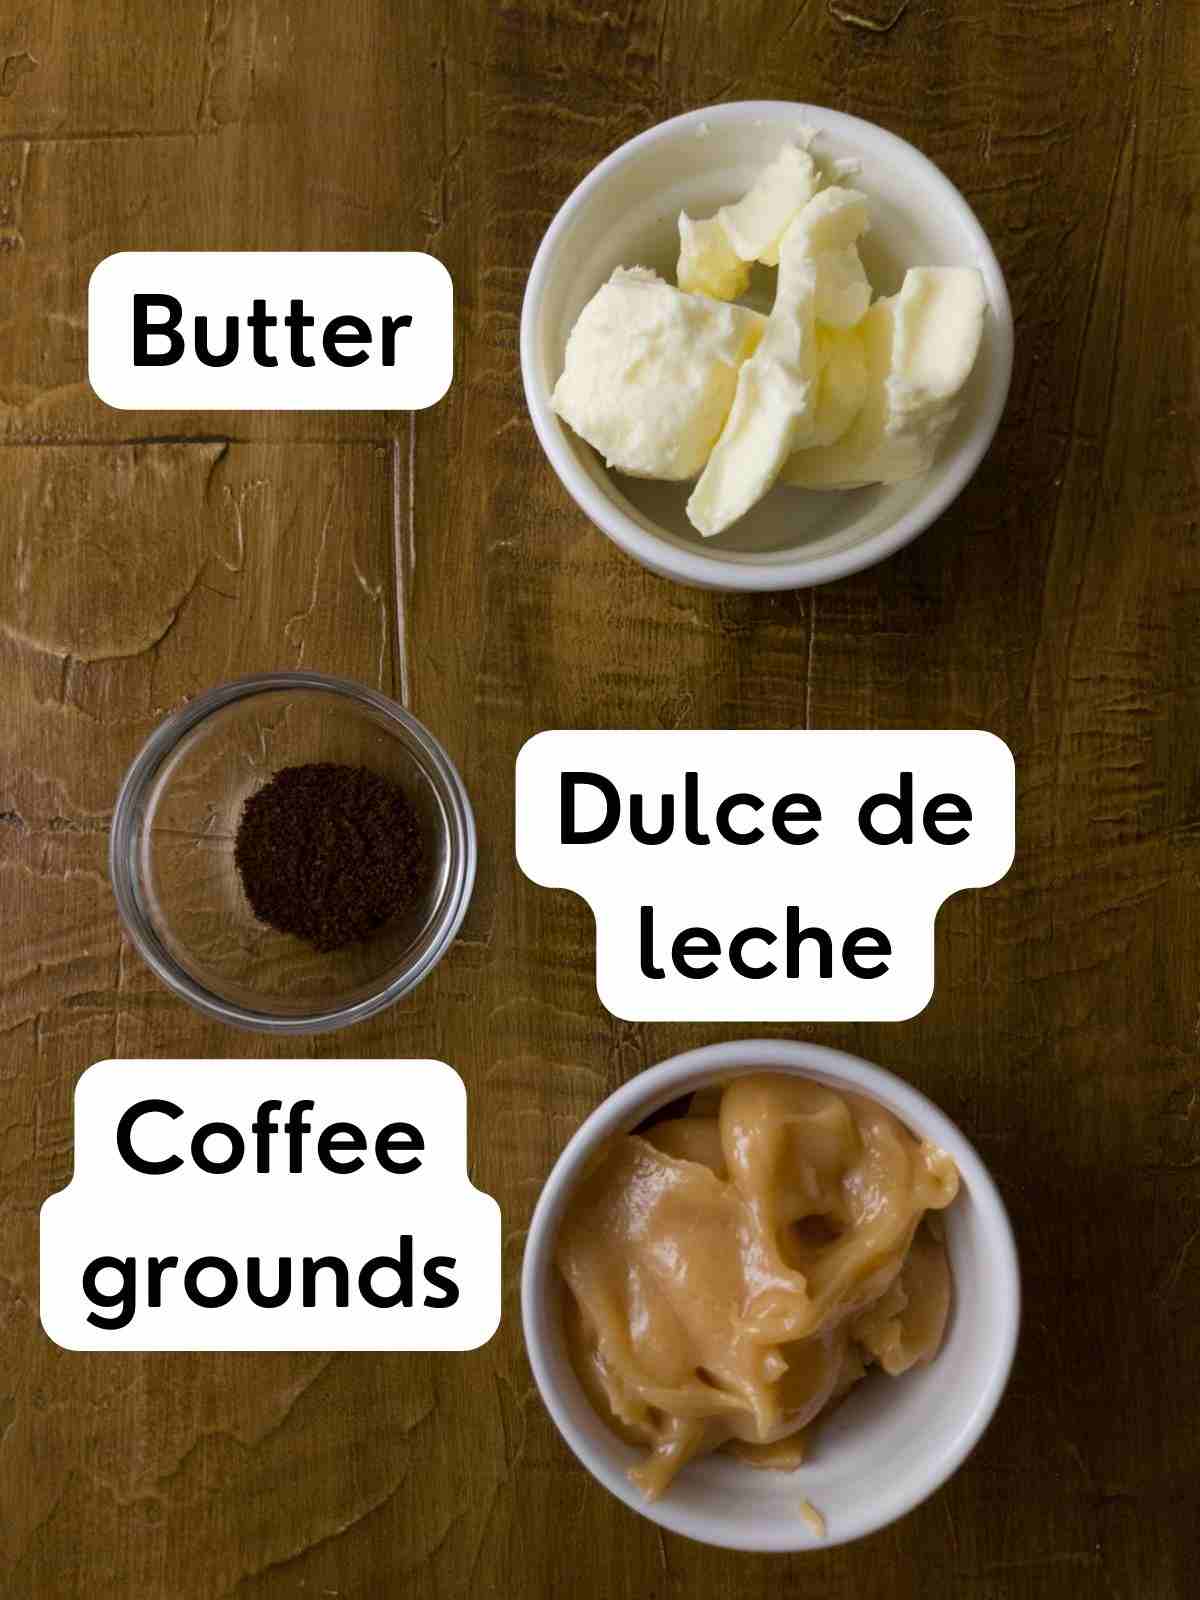 Ingredients for dulce de leche buttercream on a wooden surface.